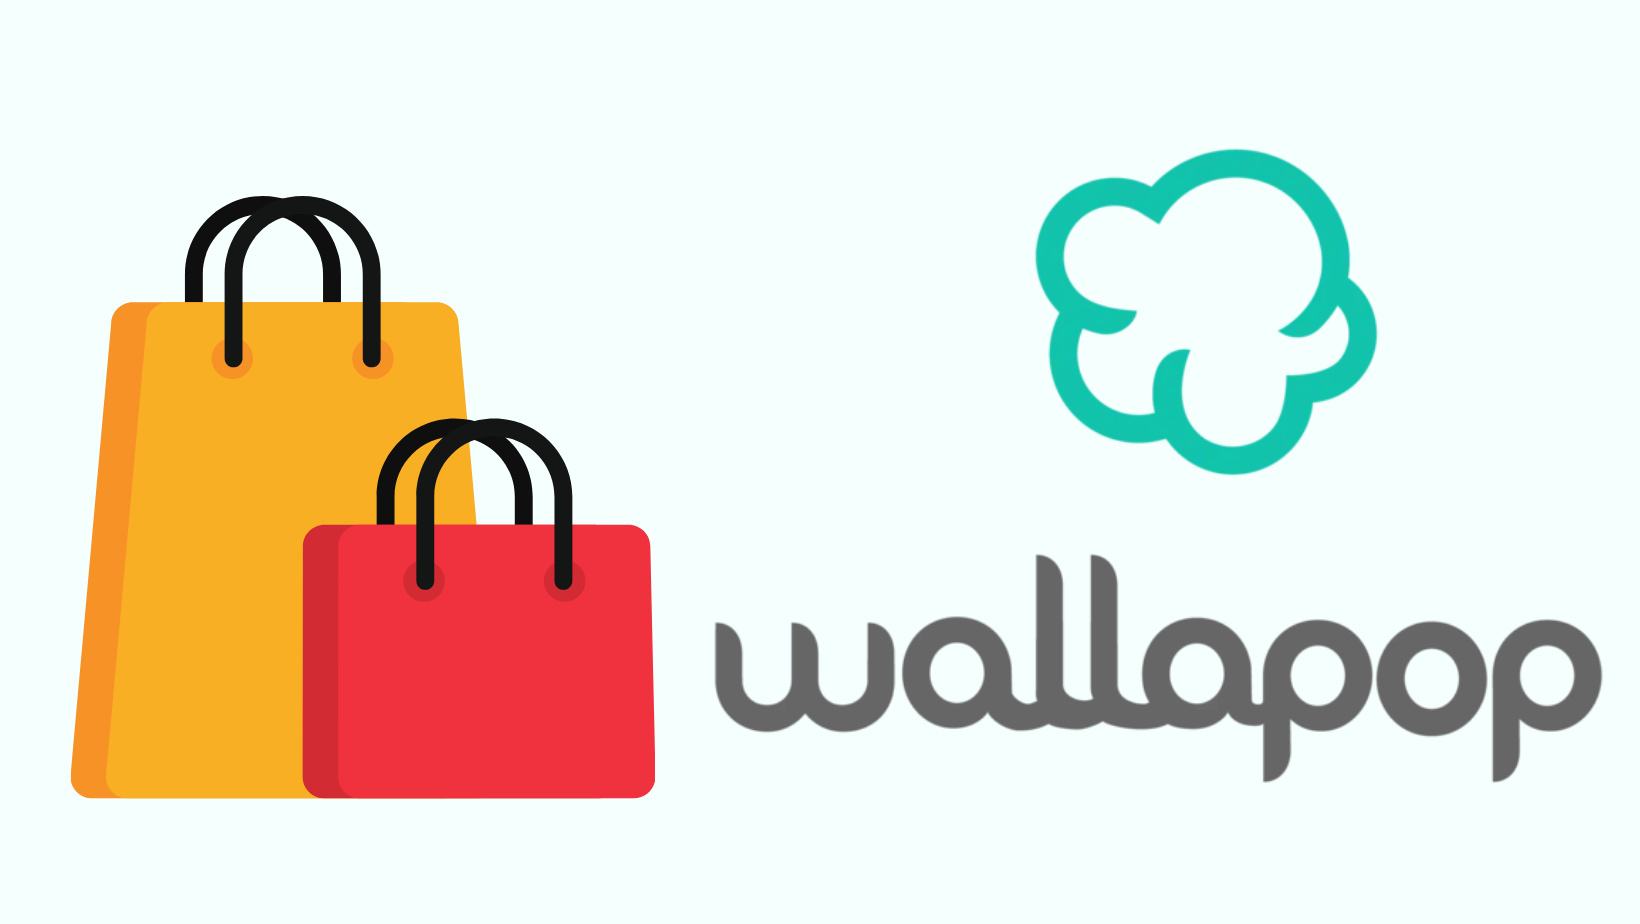 Wallpop can be contacted through social networks, email or simple.